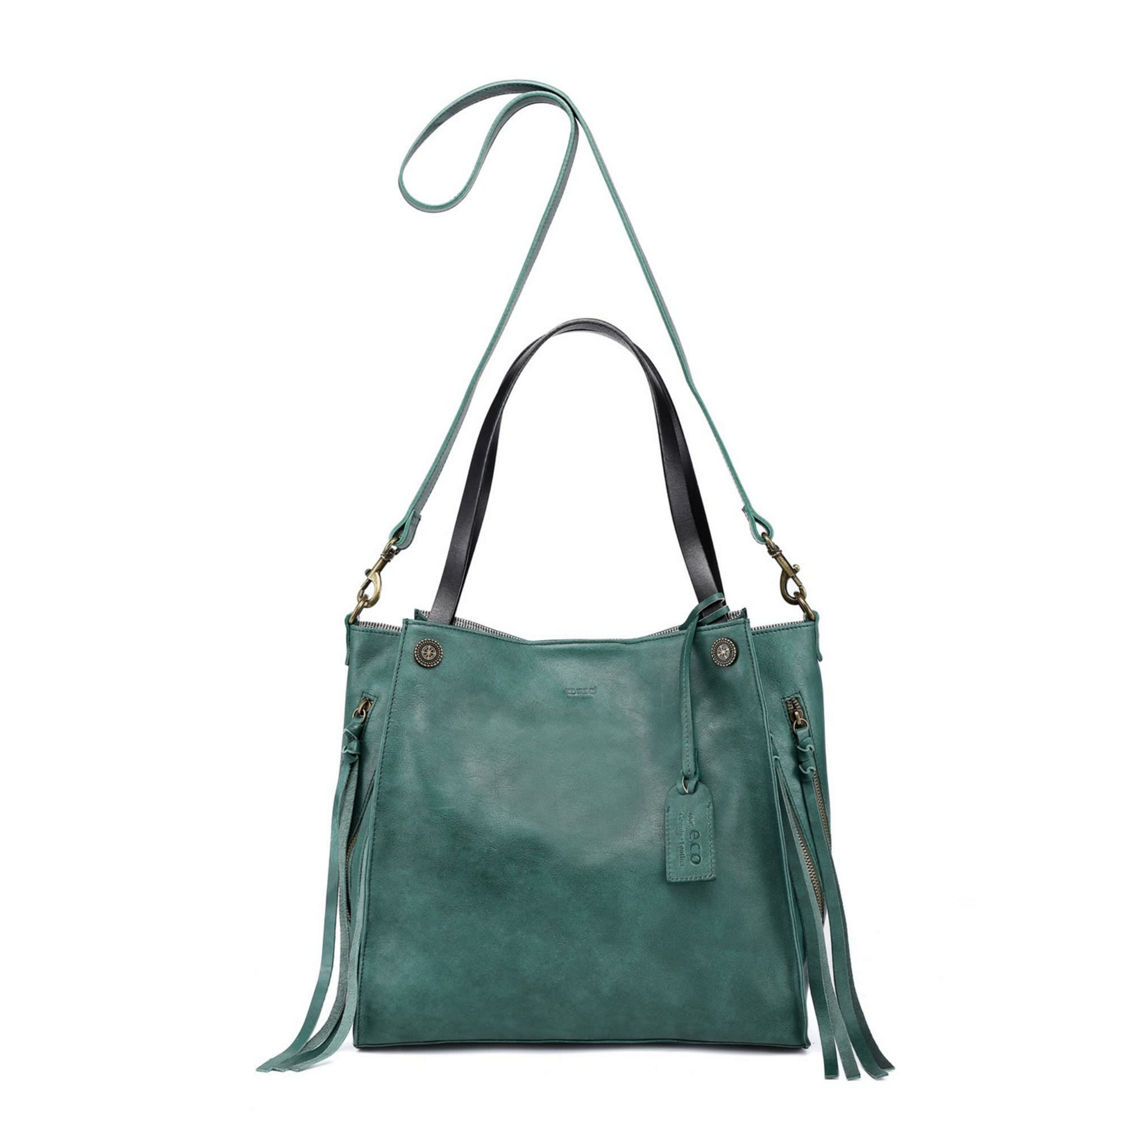 Old Trend Daisy Leather Tote - Image 3 of 5